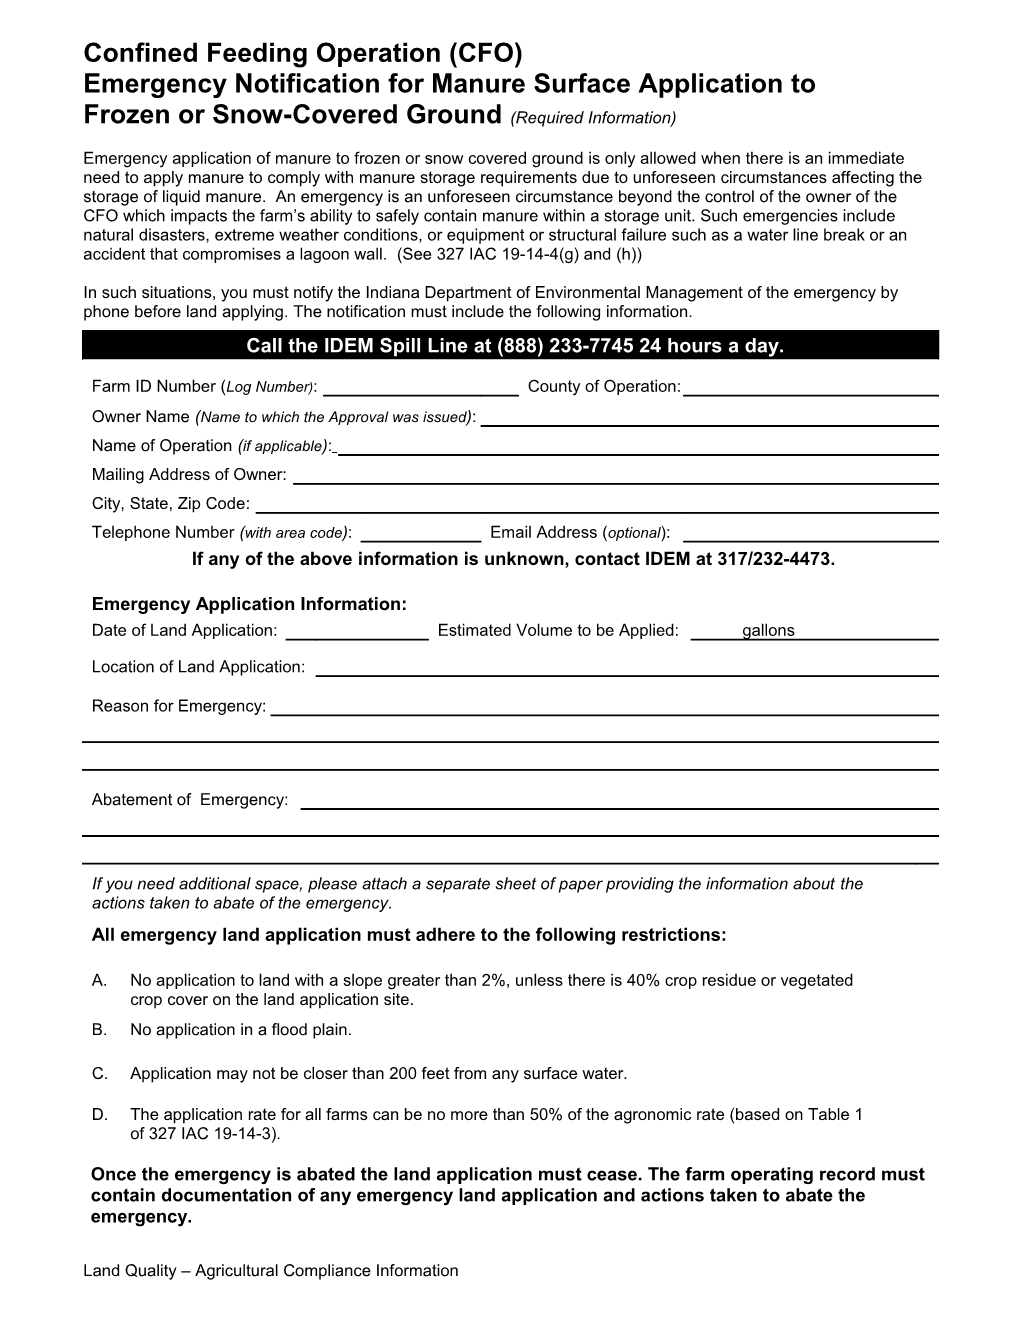 Operating Record Form (To Be Maintained on Site)